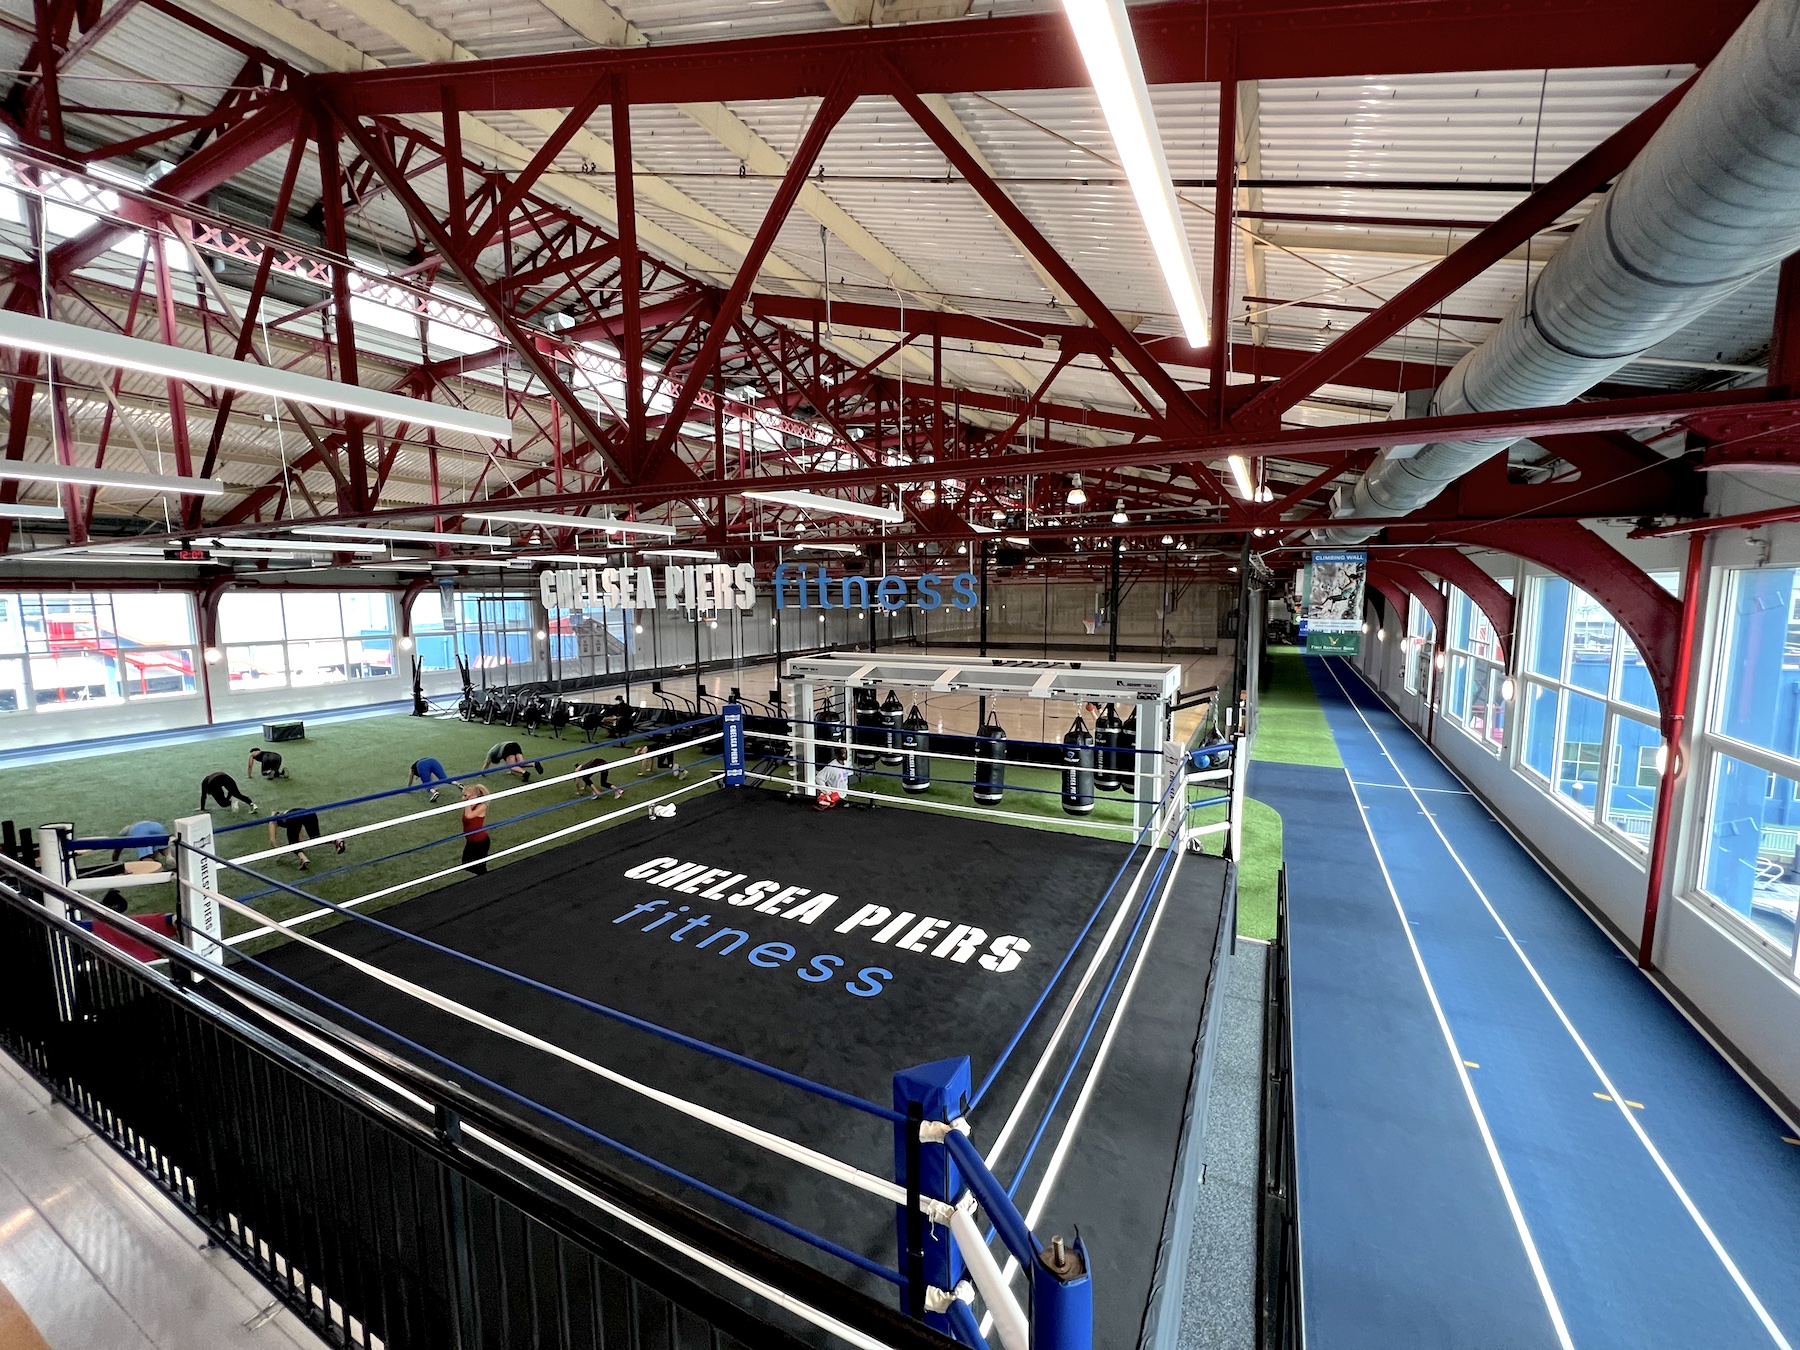 Chelsea Piers Fitness NYC - Miller Sports